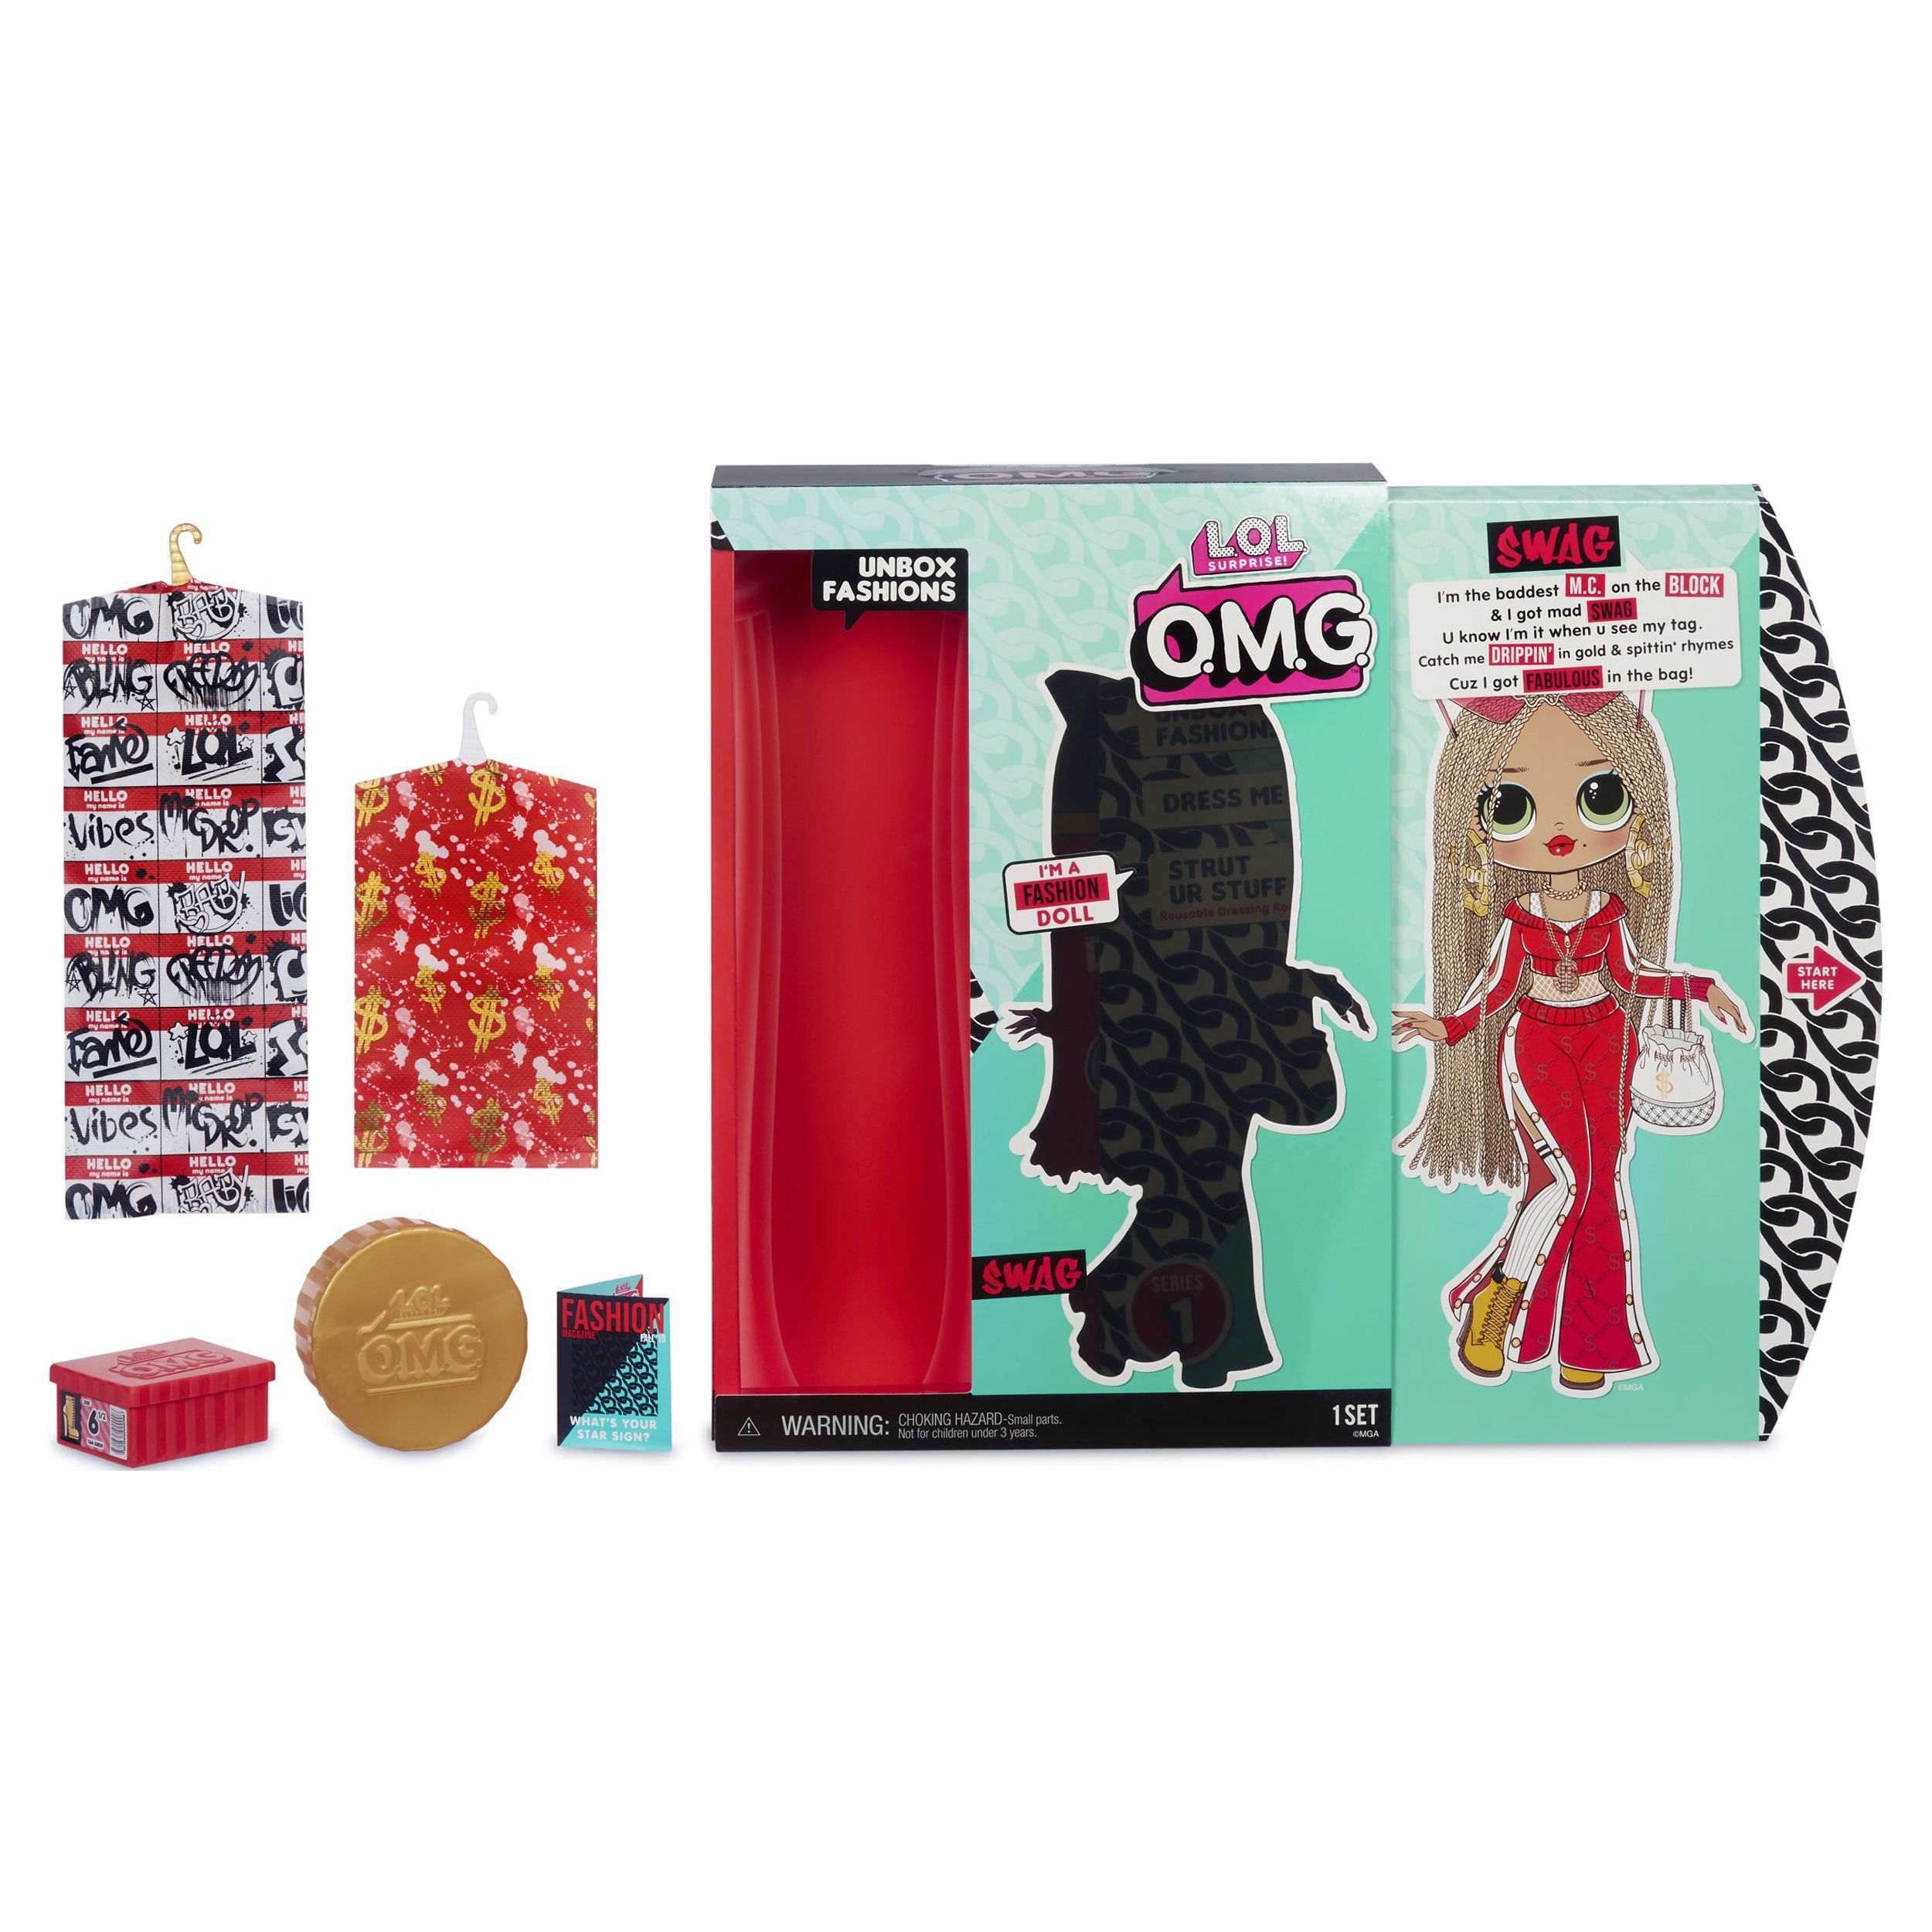 LOL Surprise OMG Swag Fashion Doll With 20 Surprises, Great Gift for Kids Ages 4 5 6+ - image 4 of 7